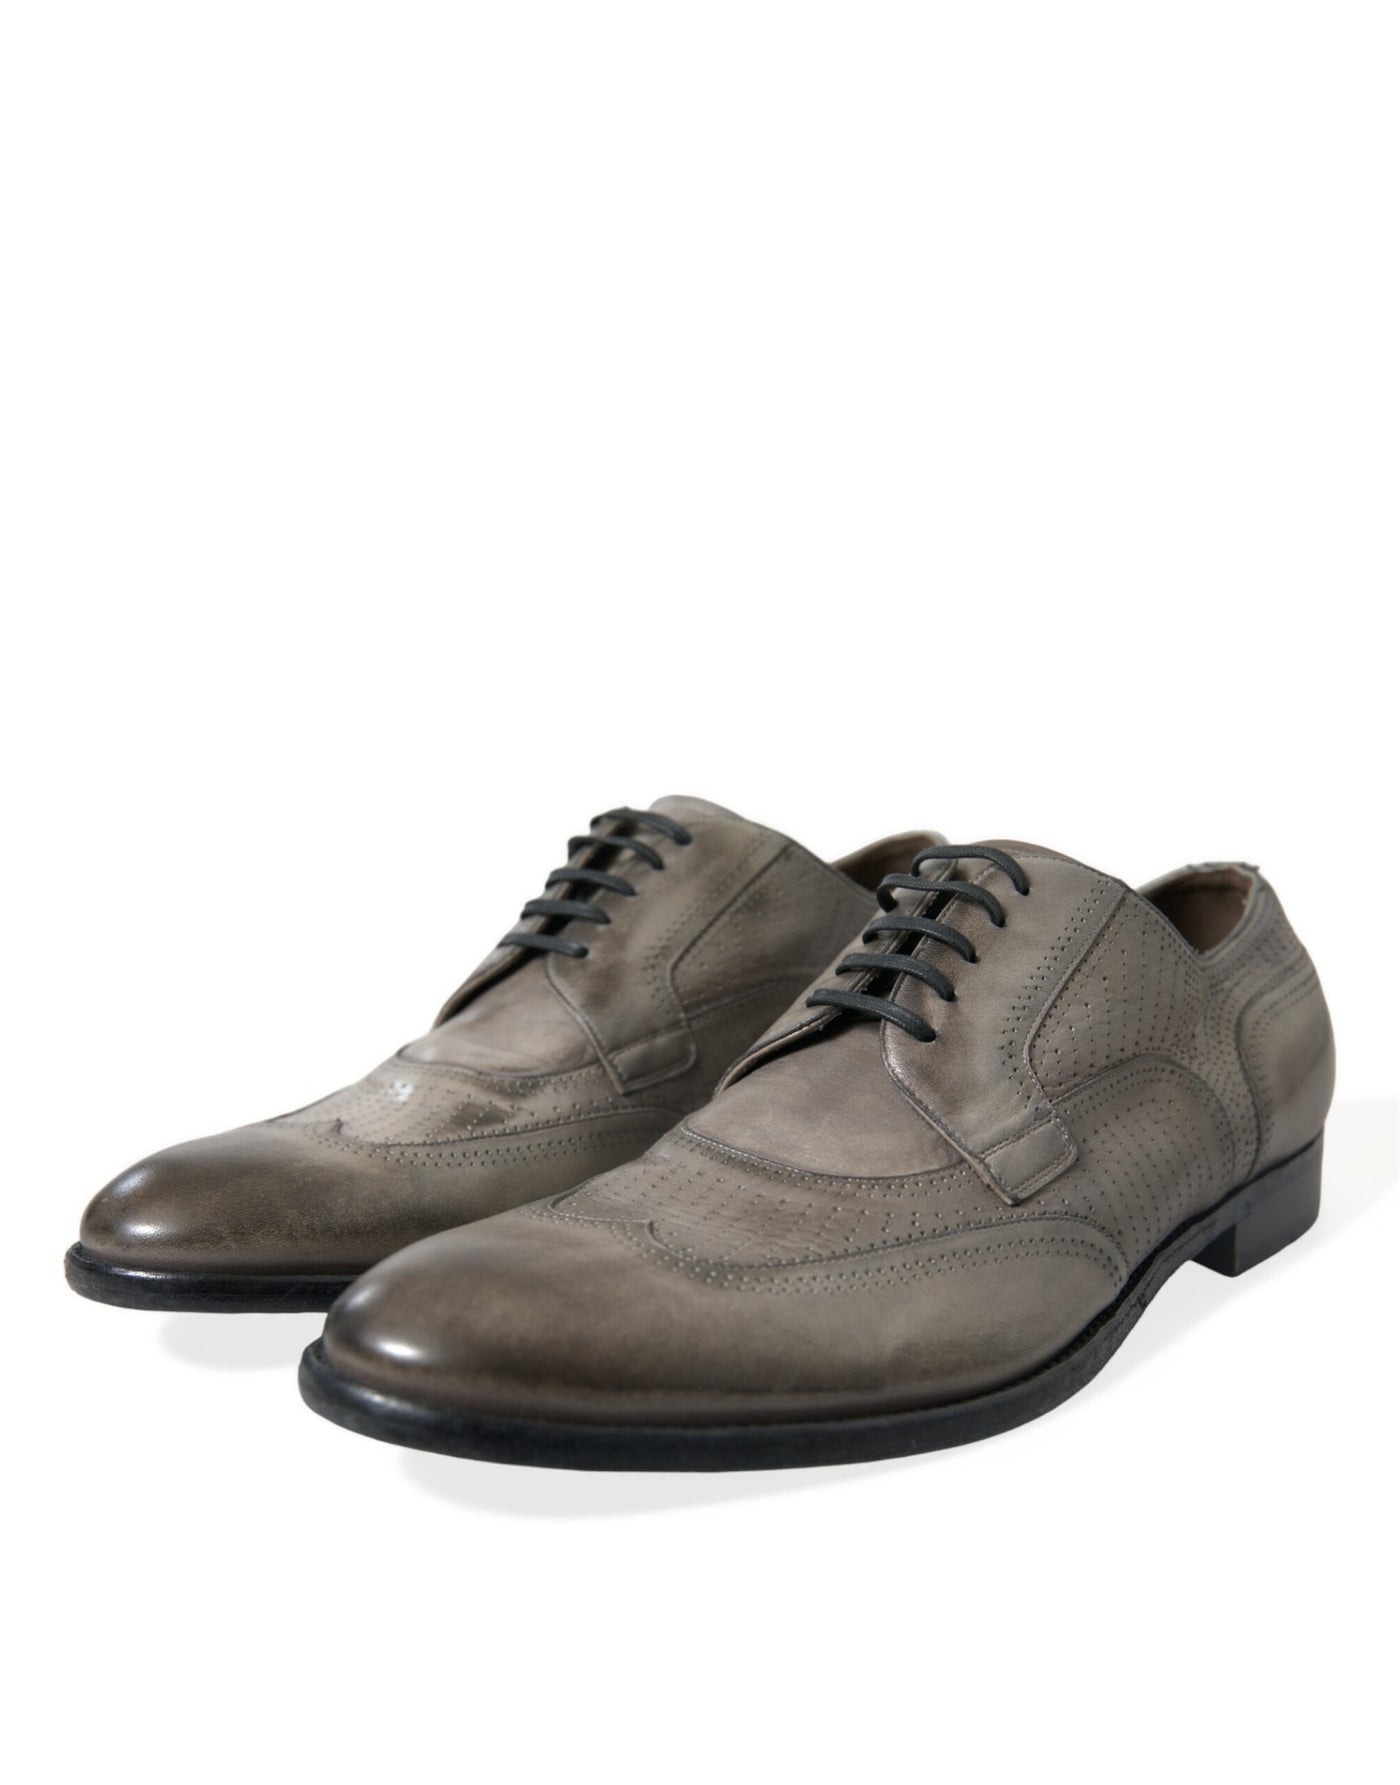 Dolce & Gabbana Brown Leather Lace Up Formal Derby Dress Shoes